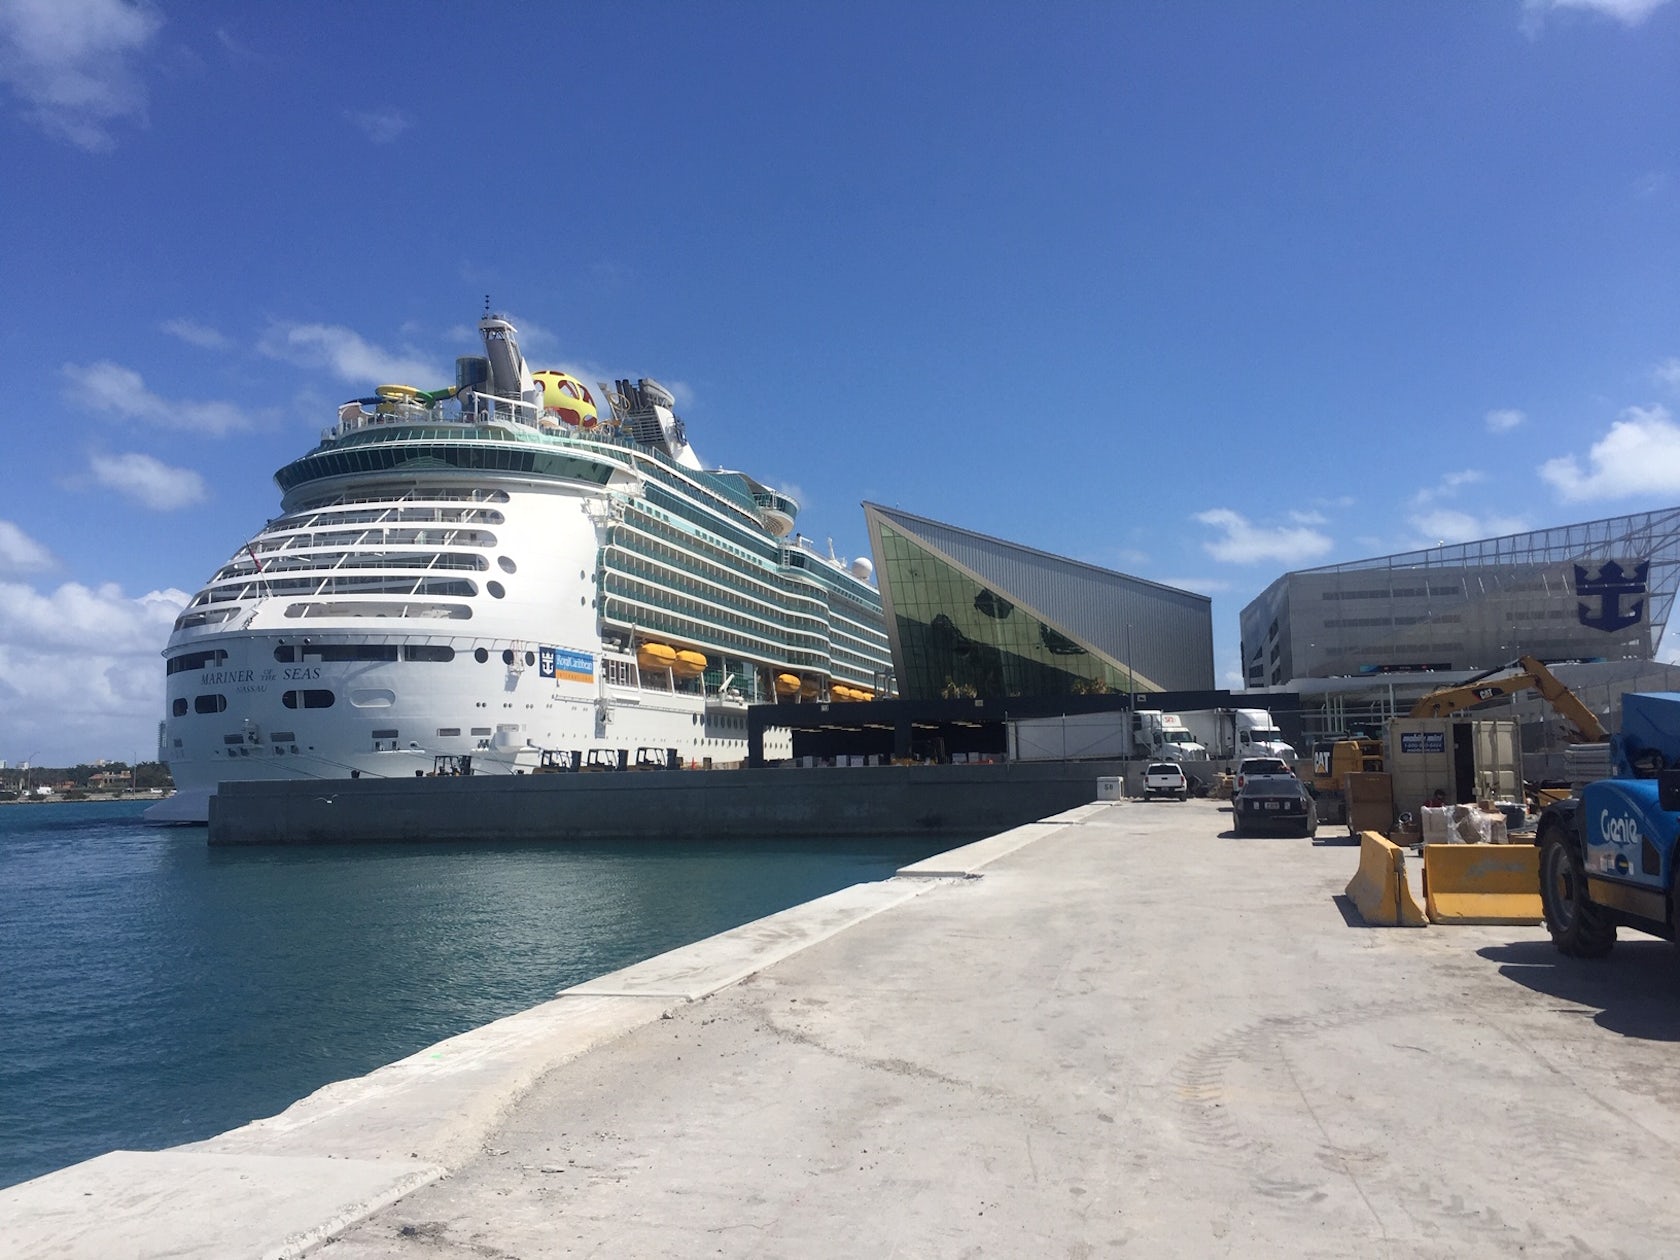 Port of Miami Royal Caribbean Cruise Terminal A "The Crown of Miami" by